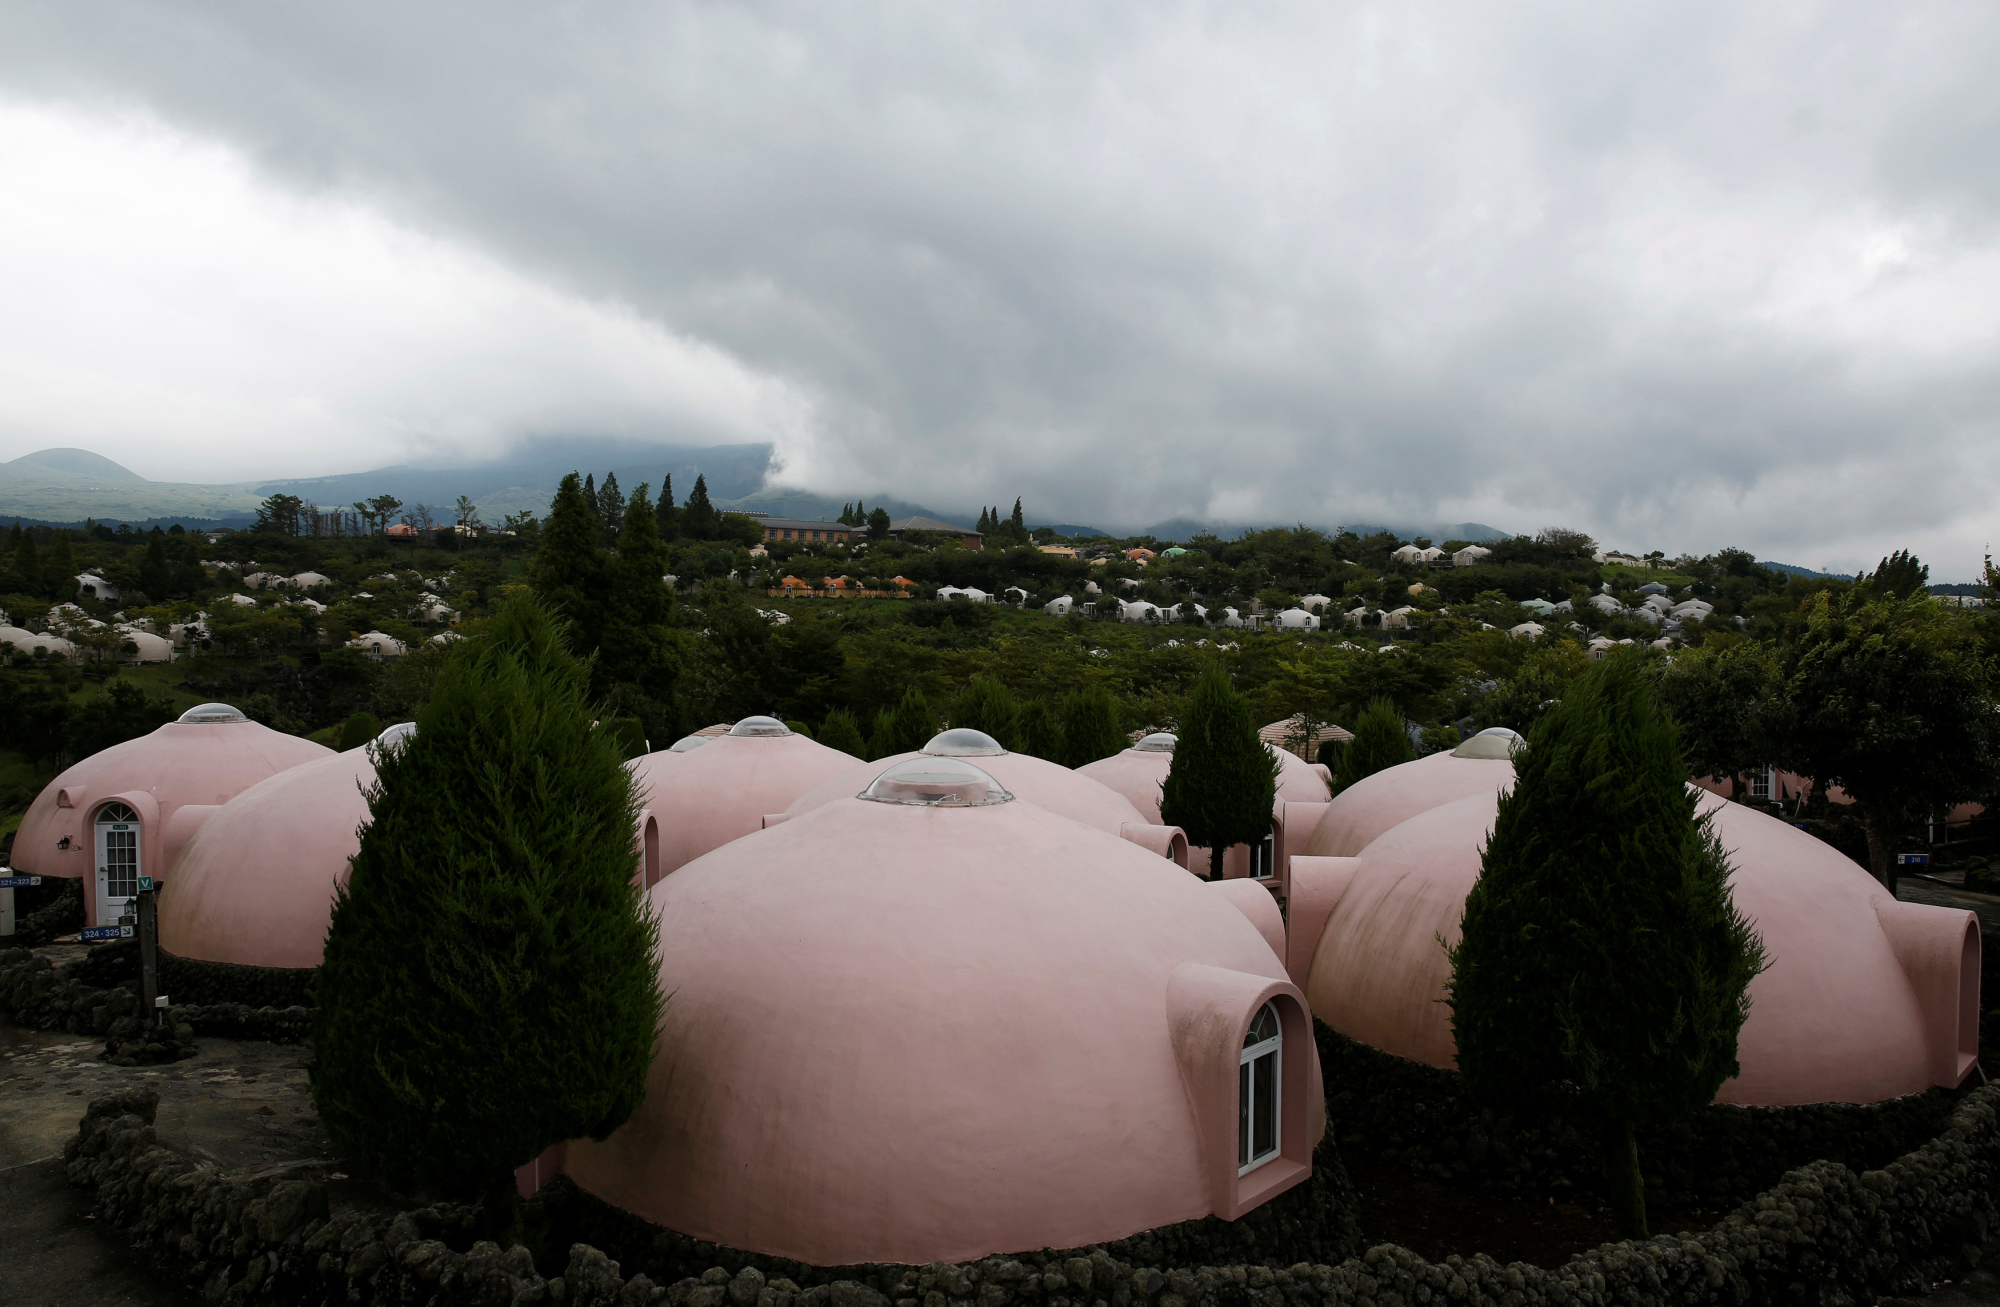 Quake-resistant domed houses made of polystyrene in Aso, Kumamoto Prefecture, are drawing visitors from Asia. | REUTERS